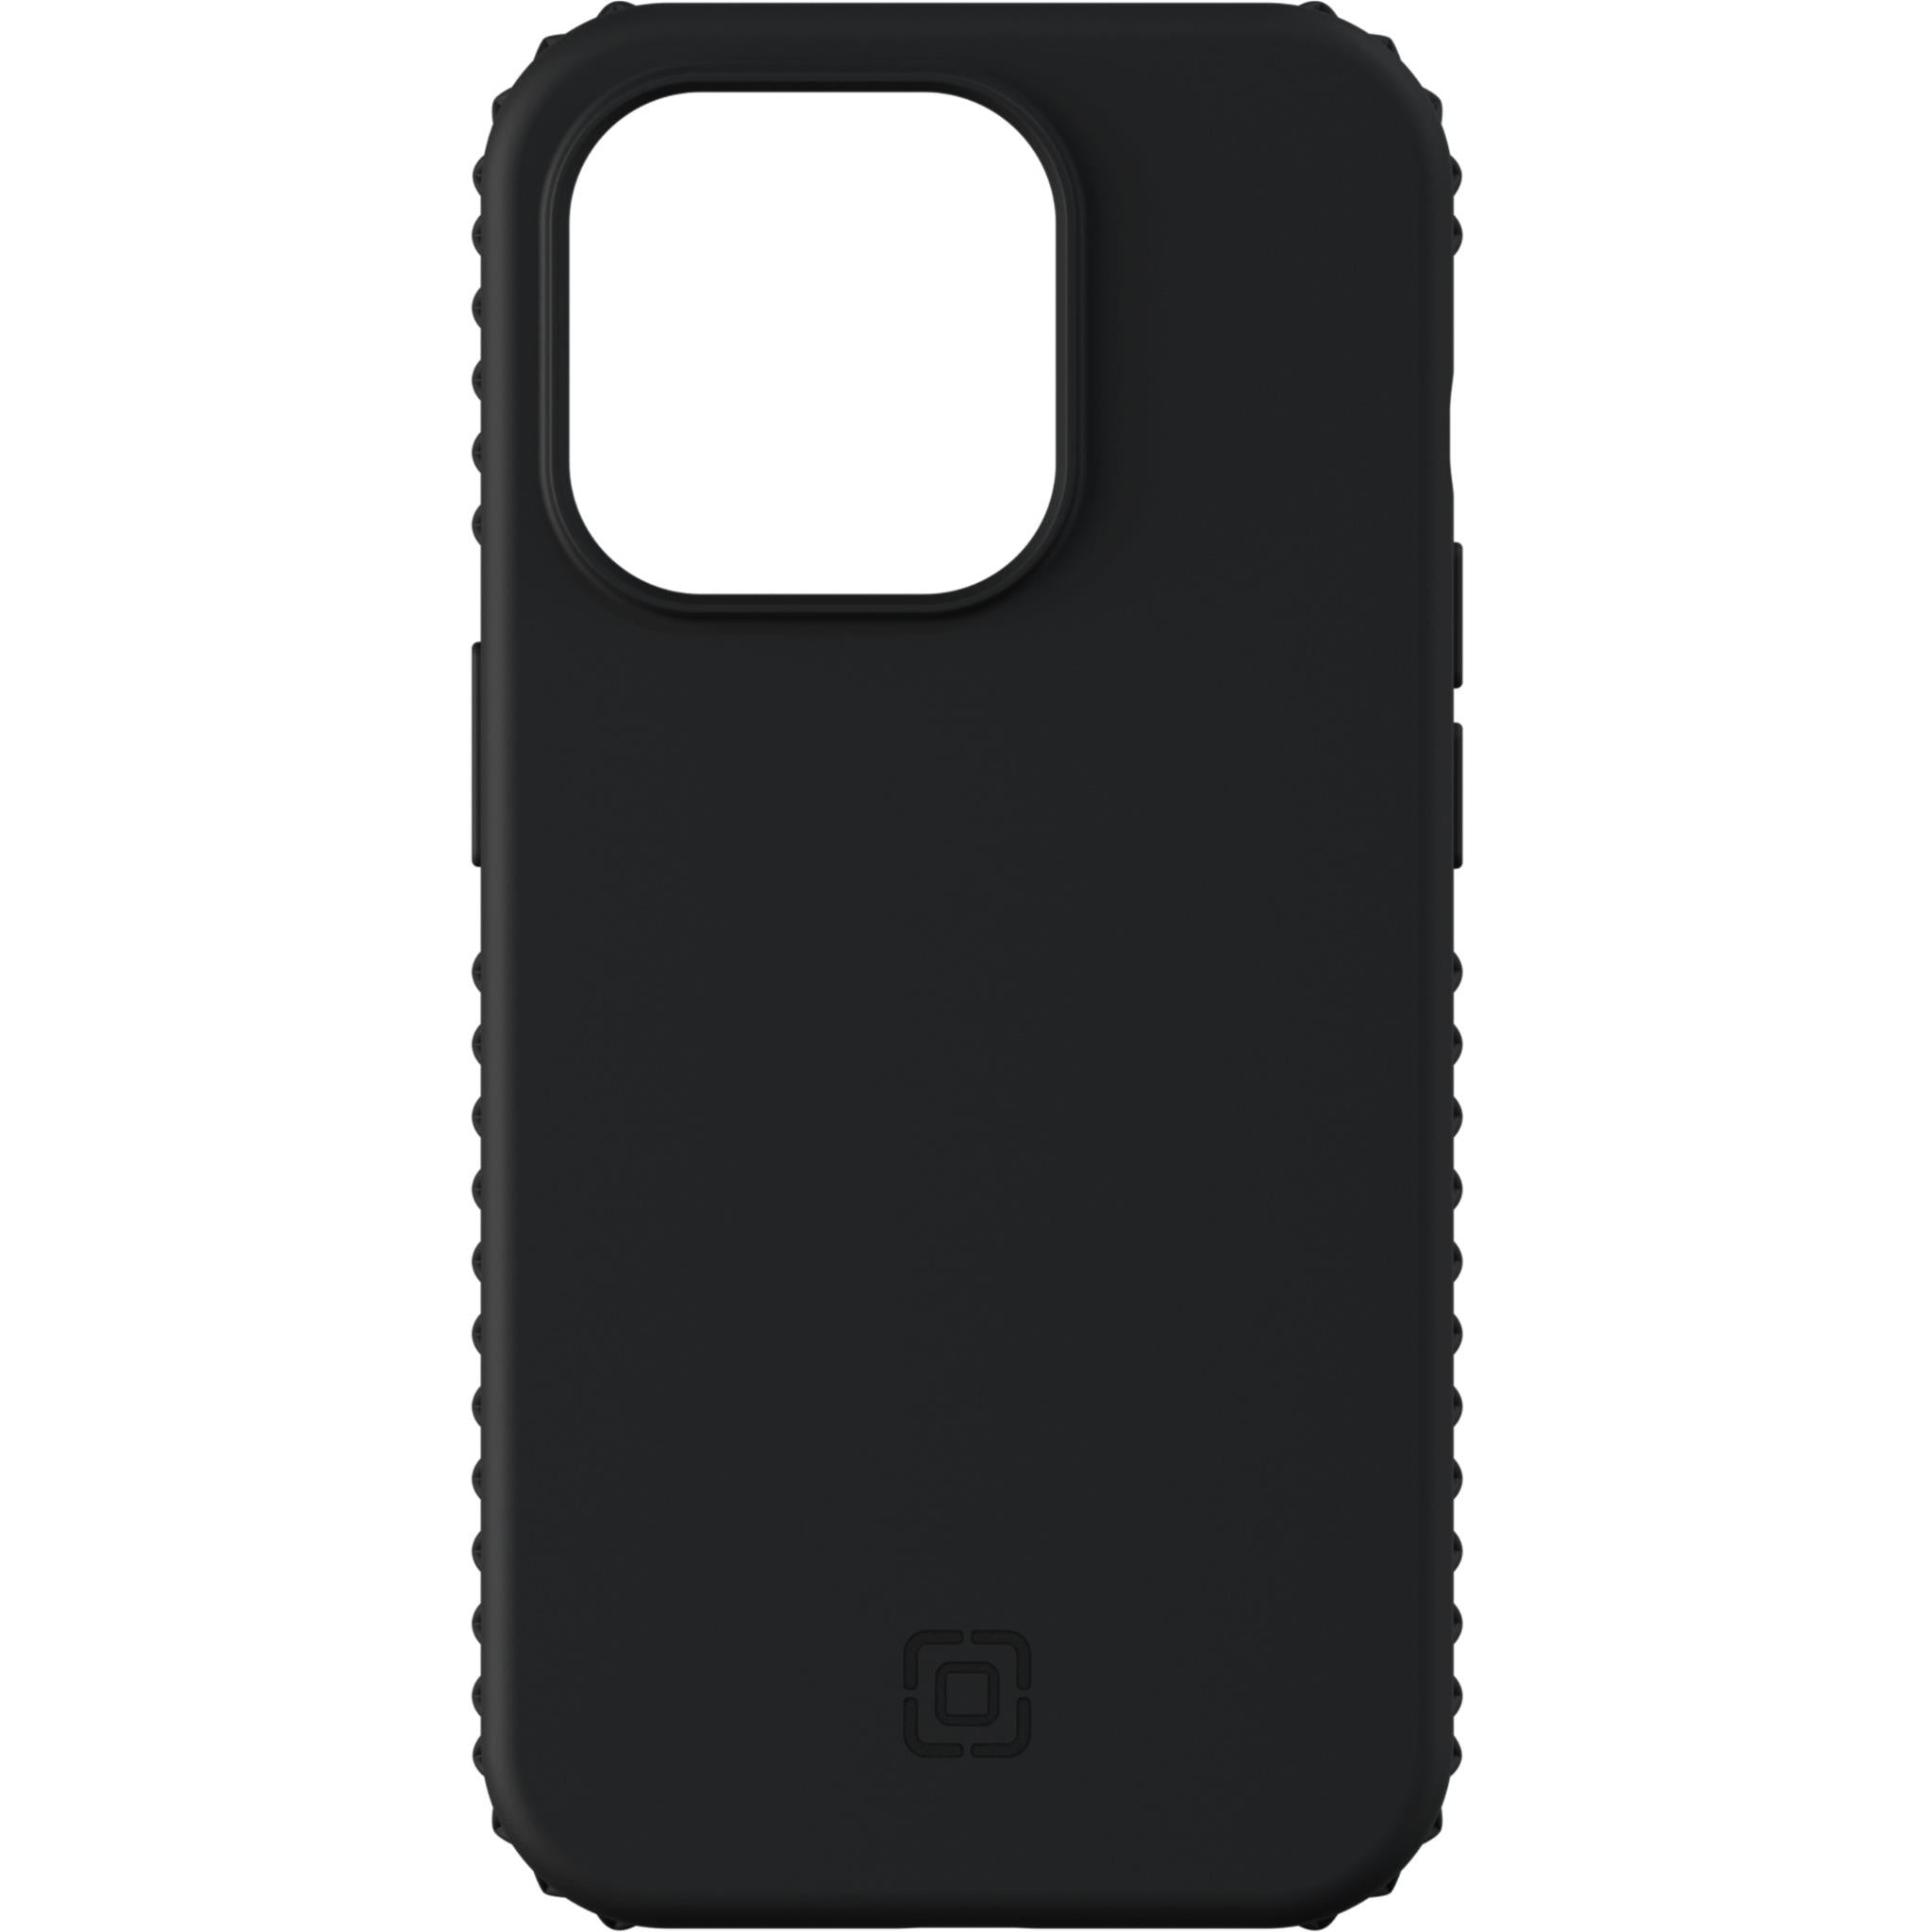 Guardian Case for Apple iPhone 11 Pro Max - Black – Pelican Phone Cases